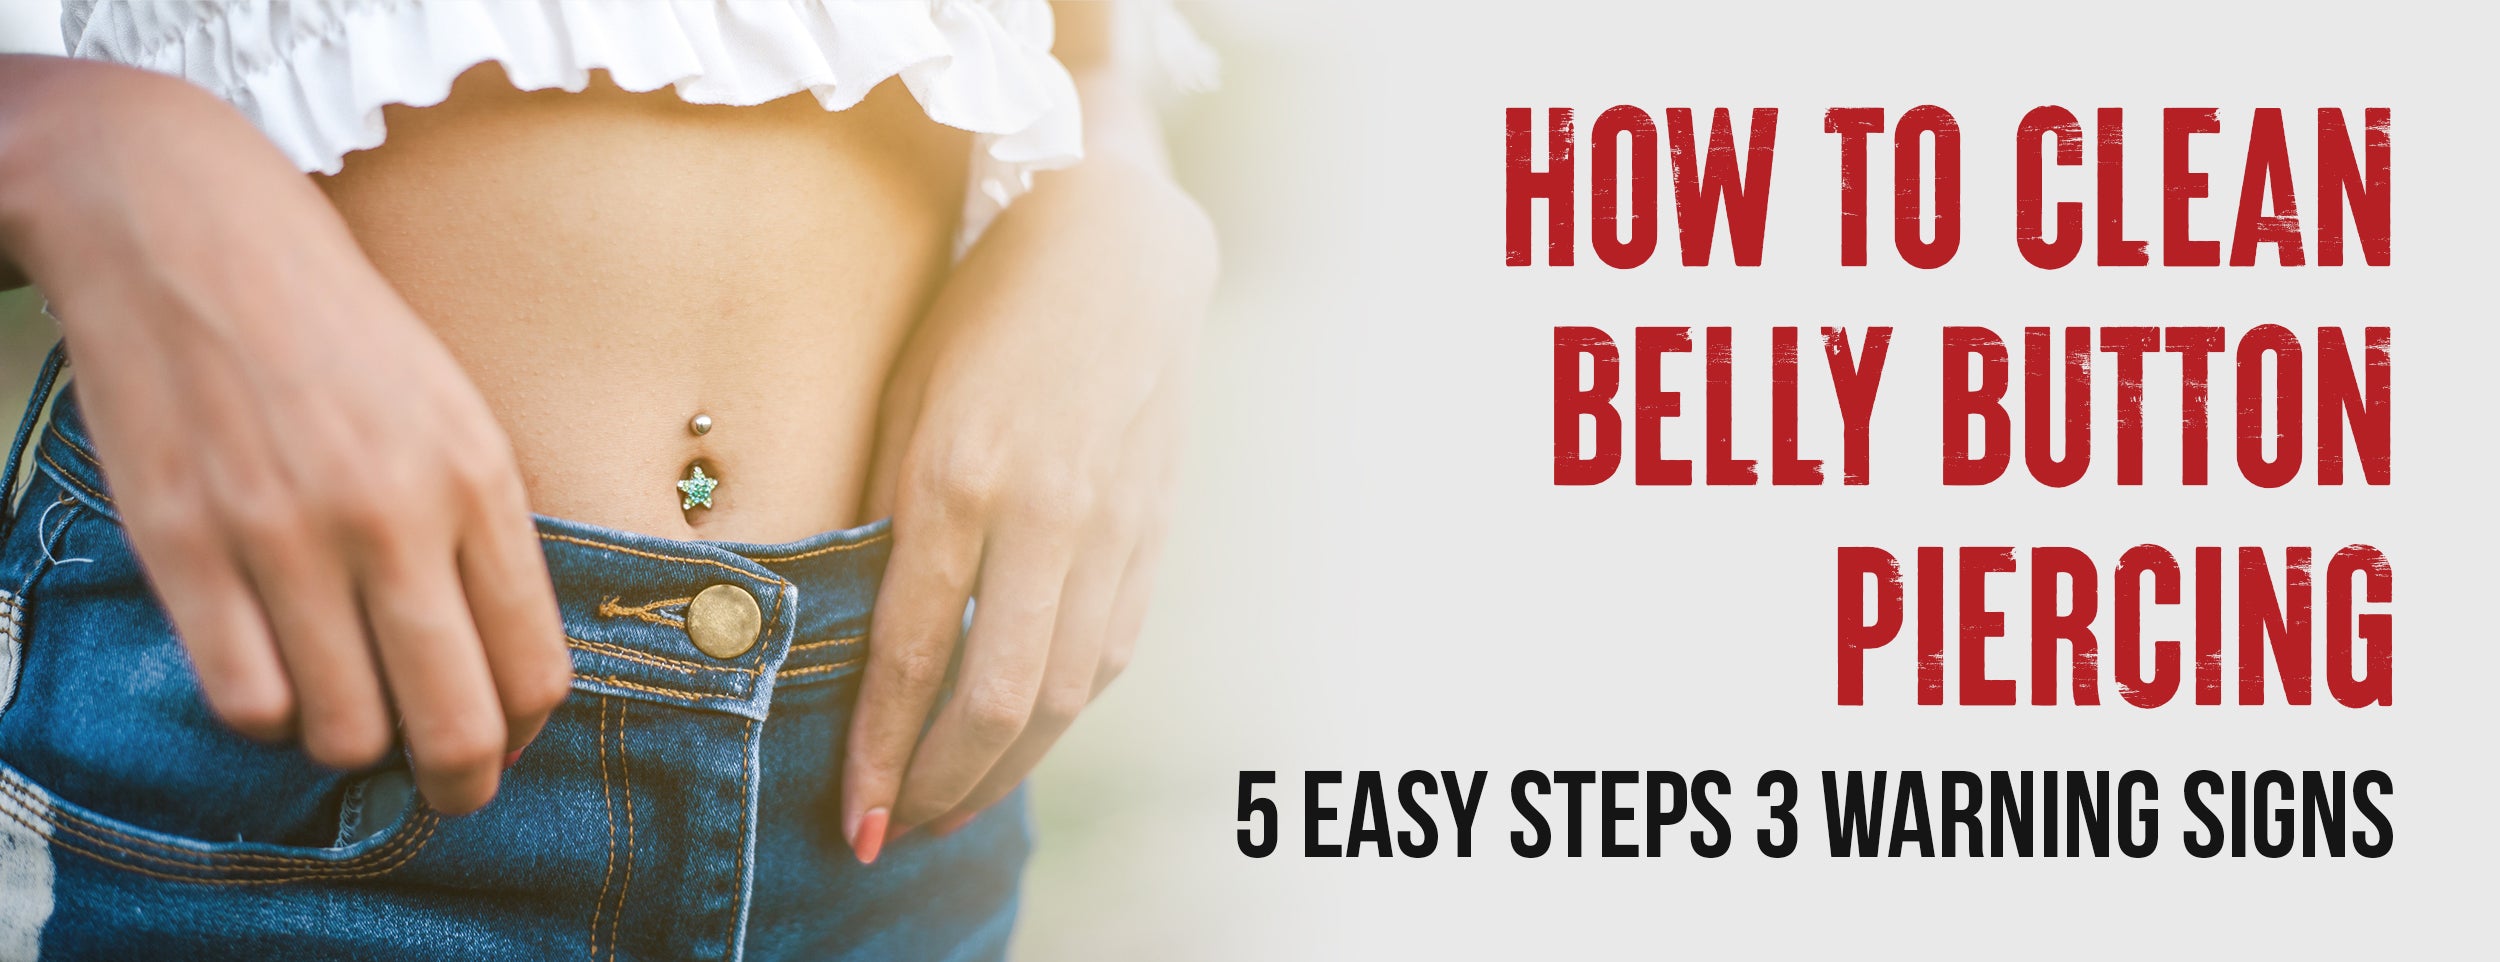 Cleaning Belly Button Piercing: 5 Easy Steps [With After Care Tips]